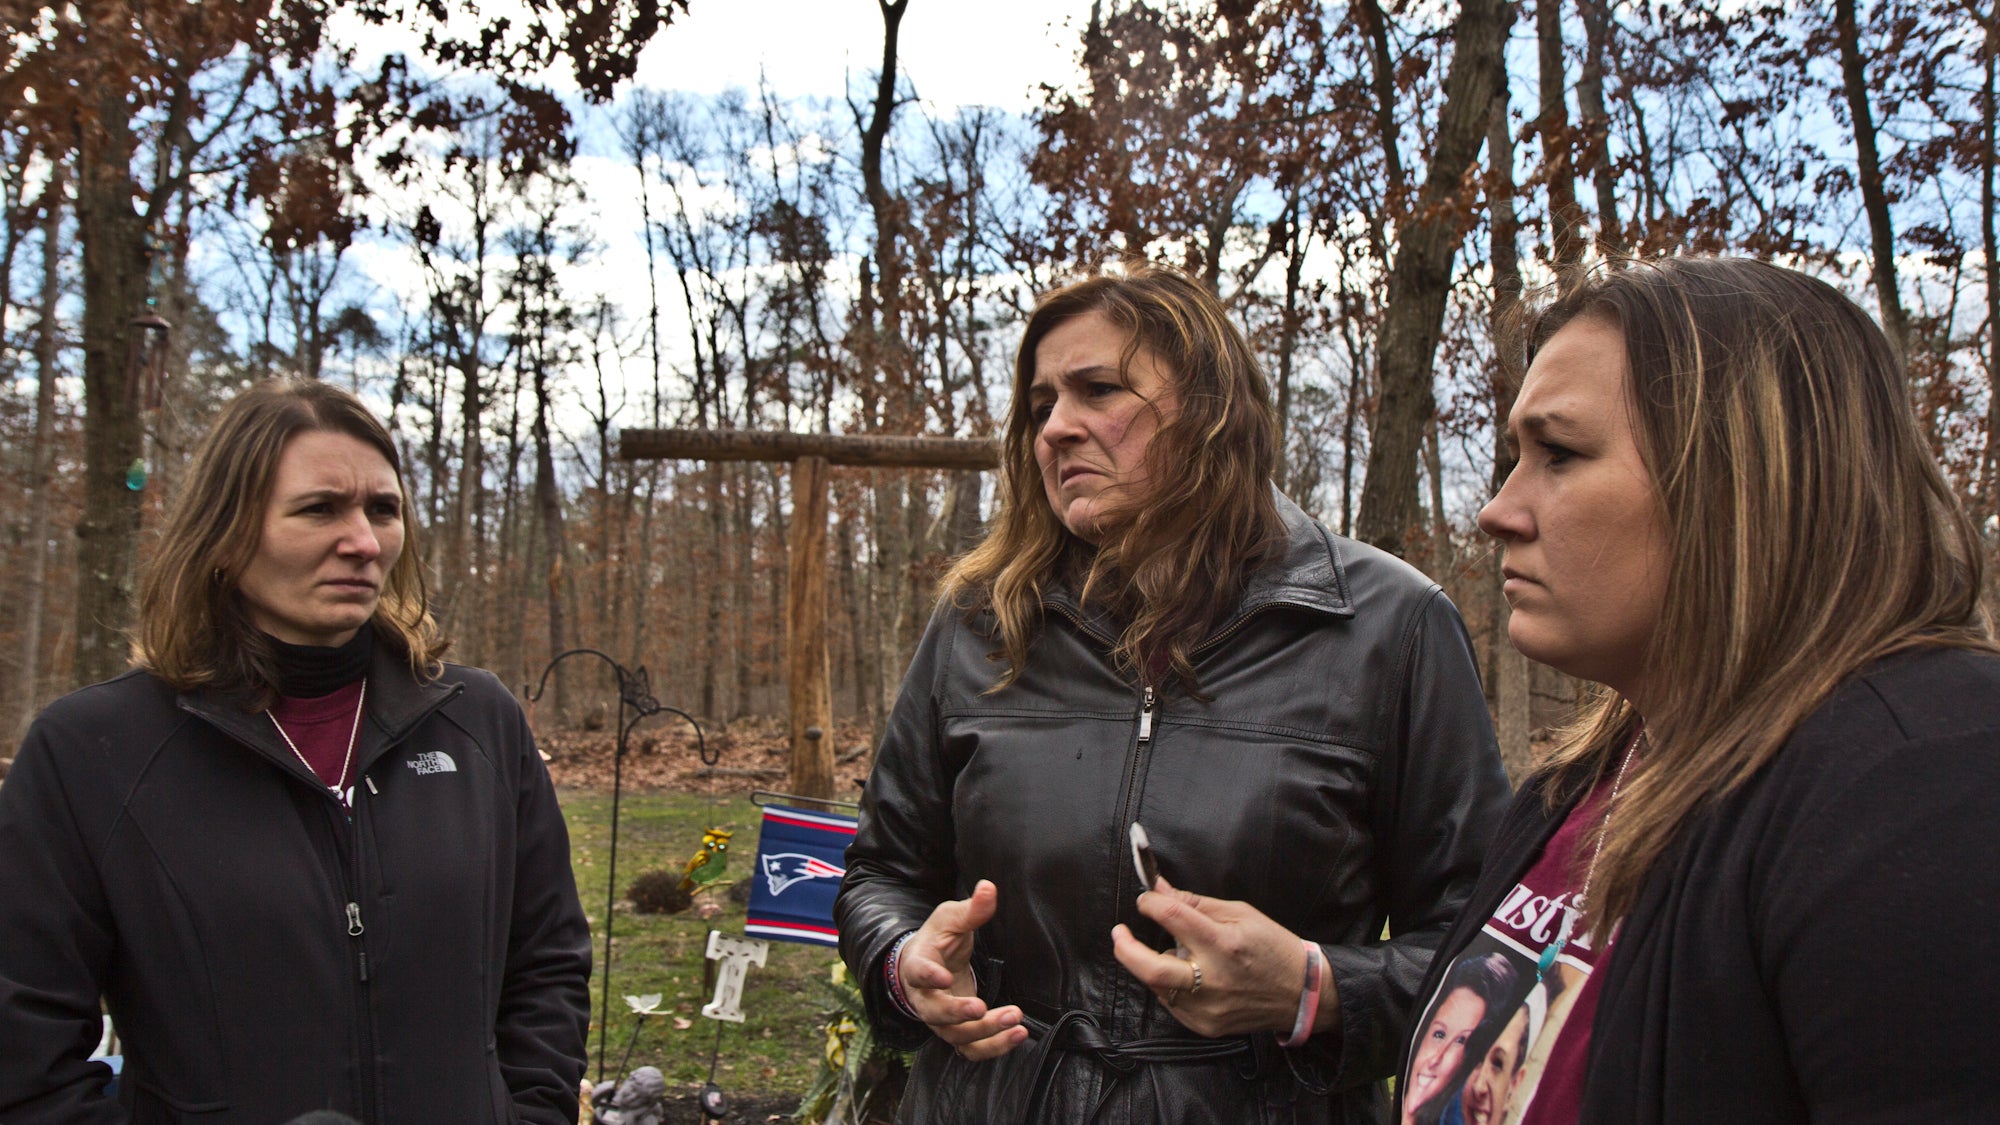 Tiffany’s sister Jessie Vallauri, mother Dianne Valiante, and sister Krystal Summerville, stand near a memorial to her in the yard of the family’s home. (Kimberly Paynter/WHYY)